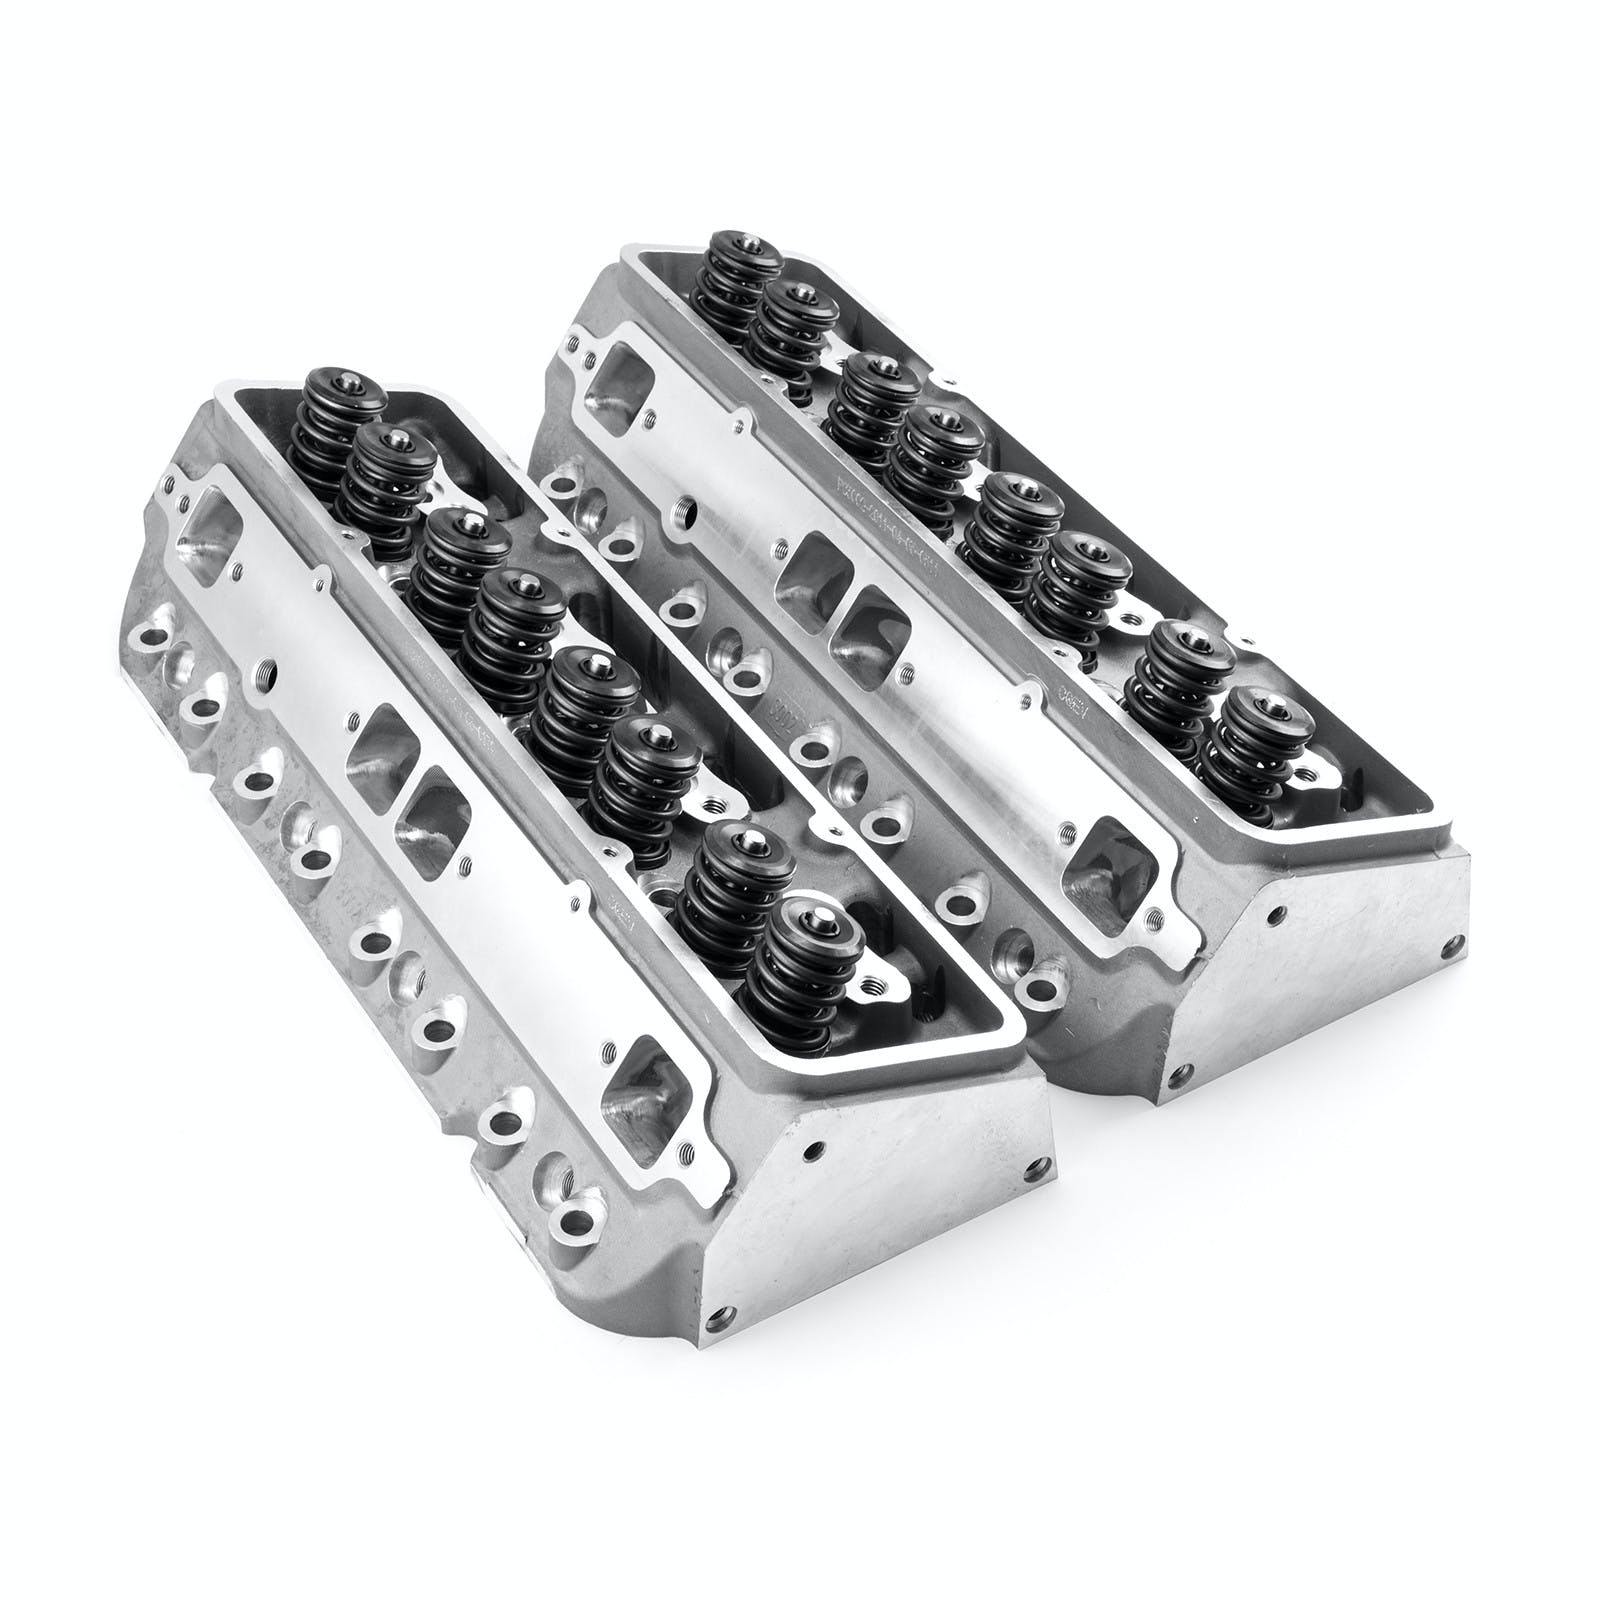 Speedmaster PCE281.2022 217cc 68cc Straight CNC Solid-FT Complete Aluminum Cylinder Heads